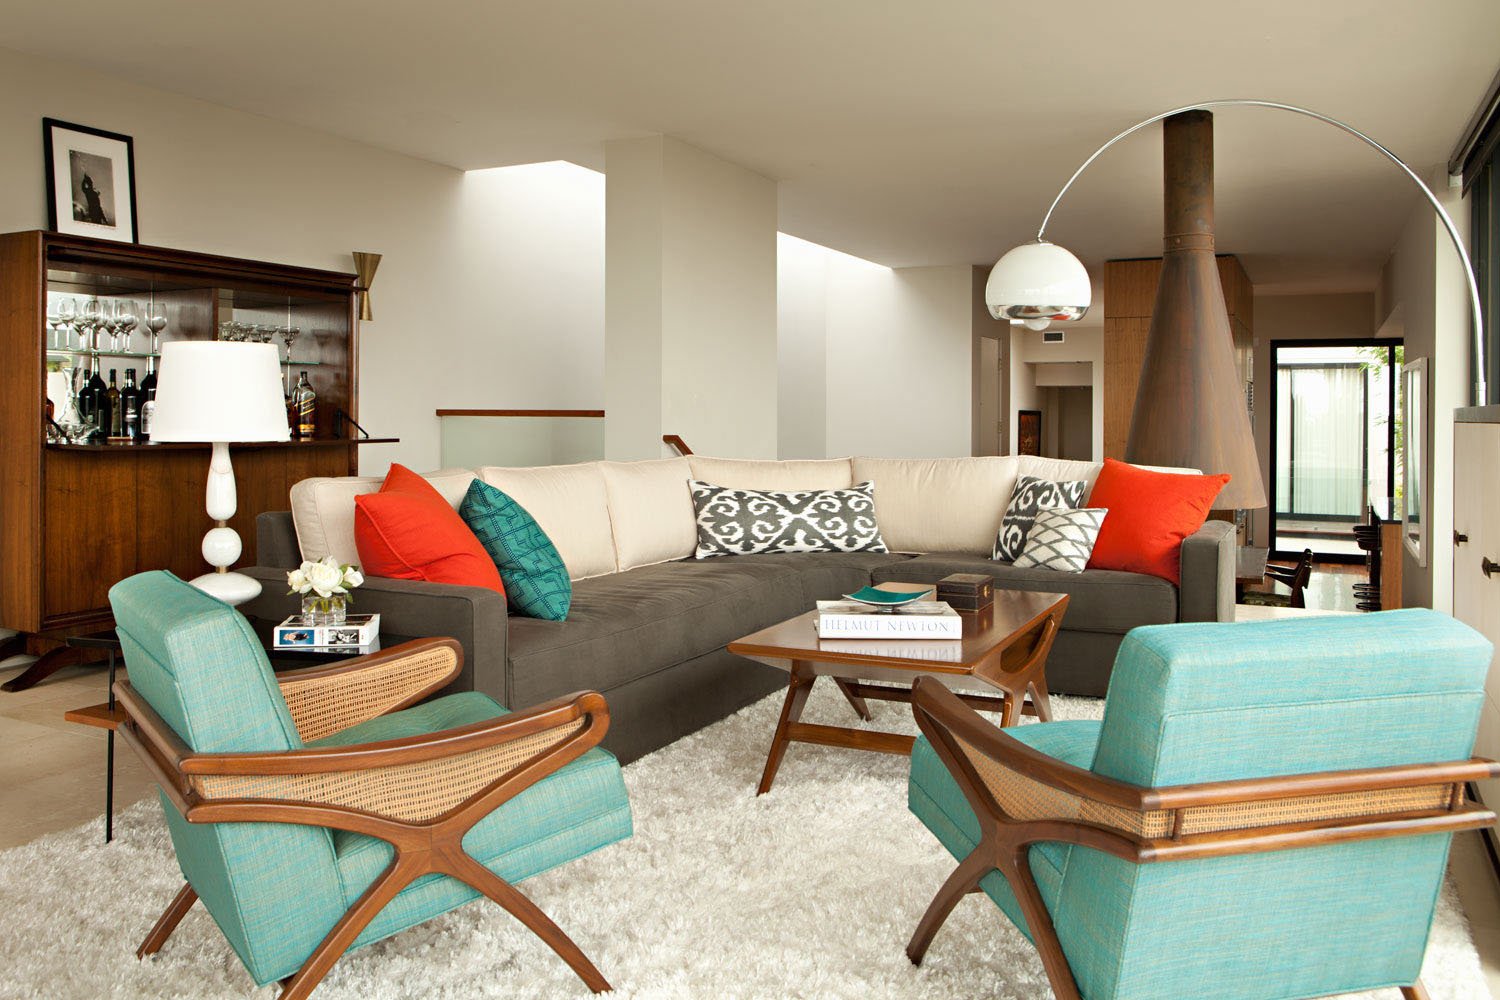 A living room with a 70s retro style, featuring a couch, chairs, and a coffee table.